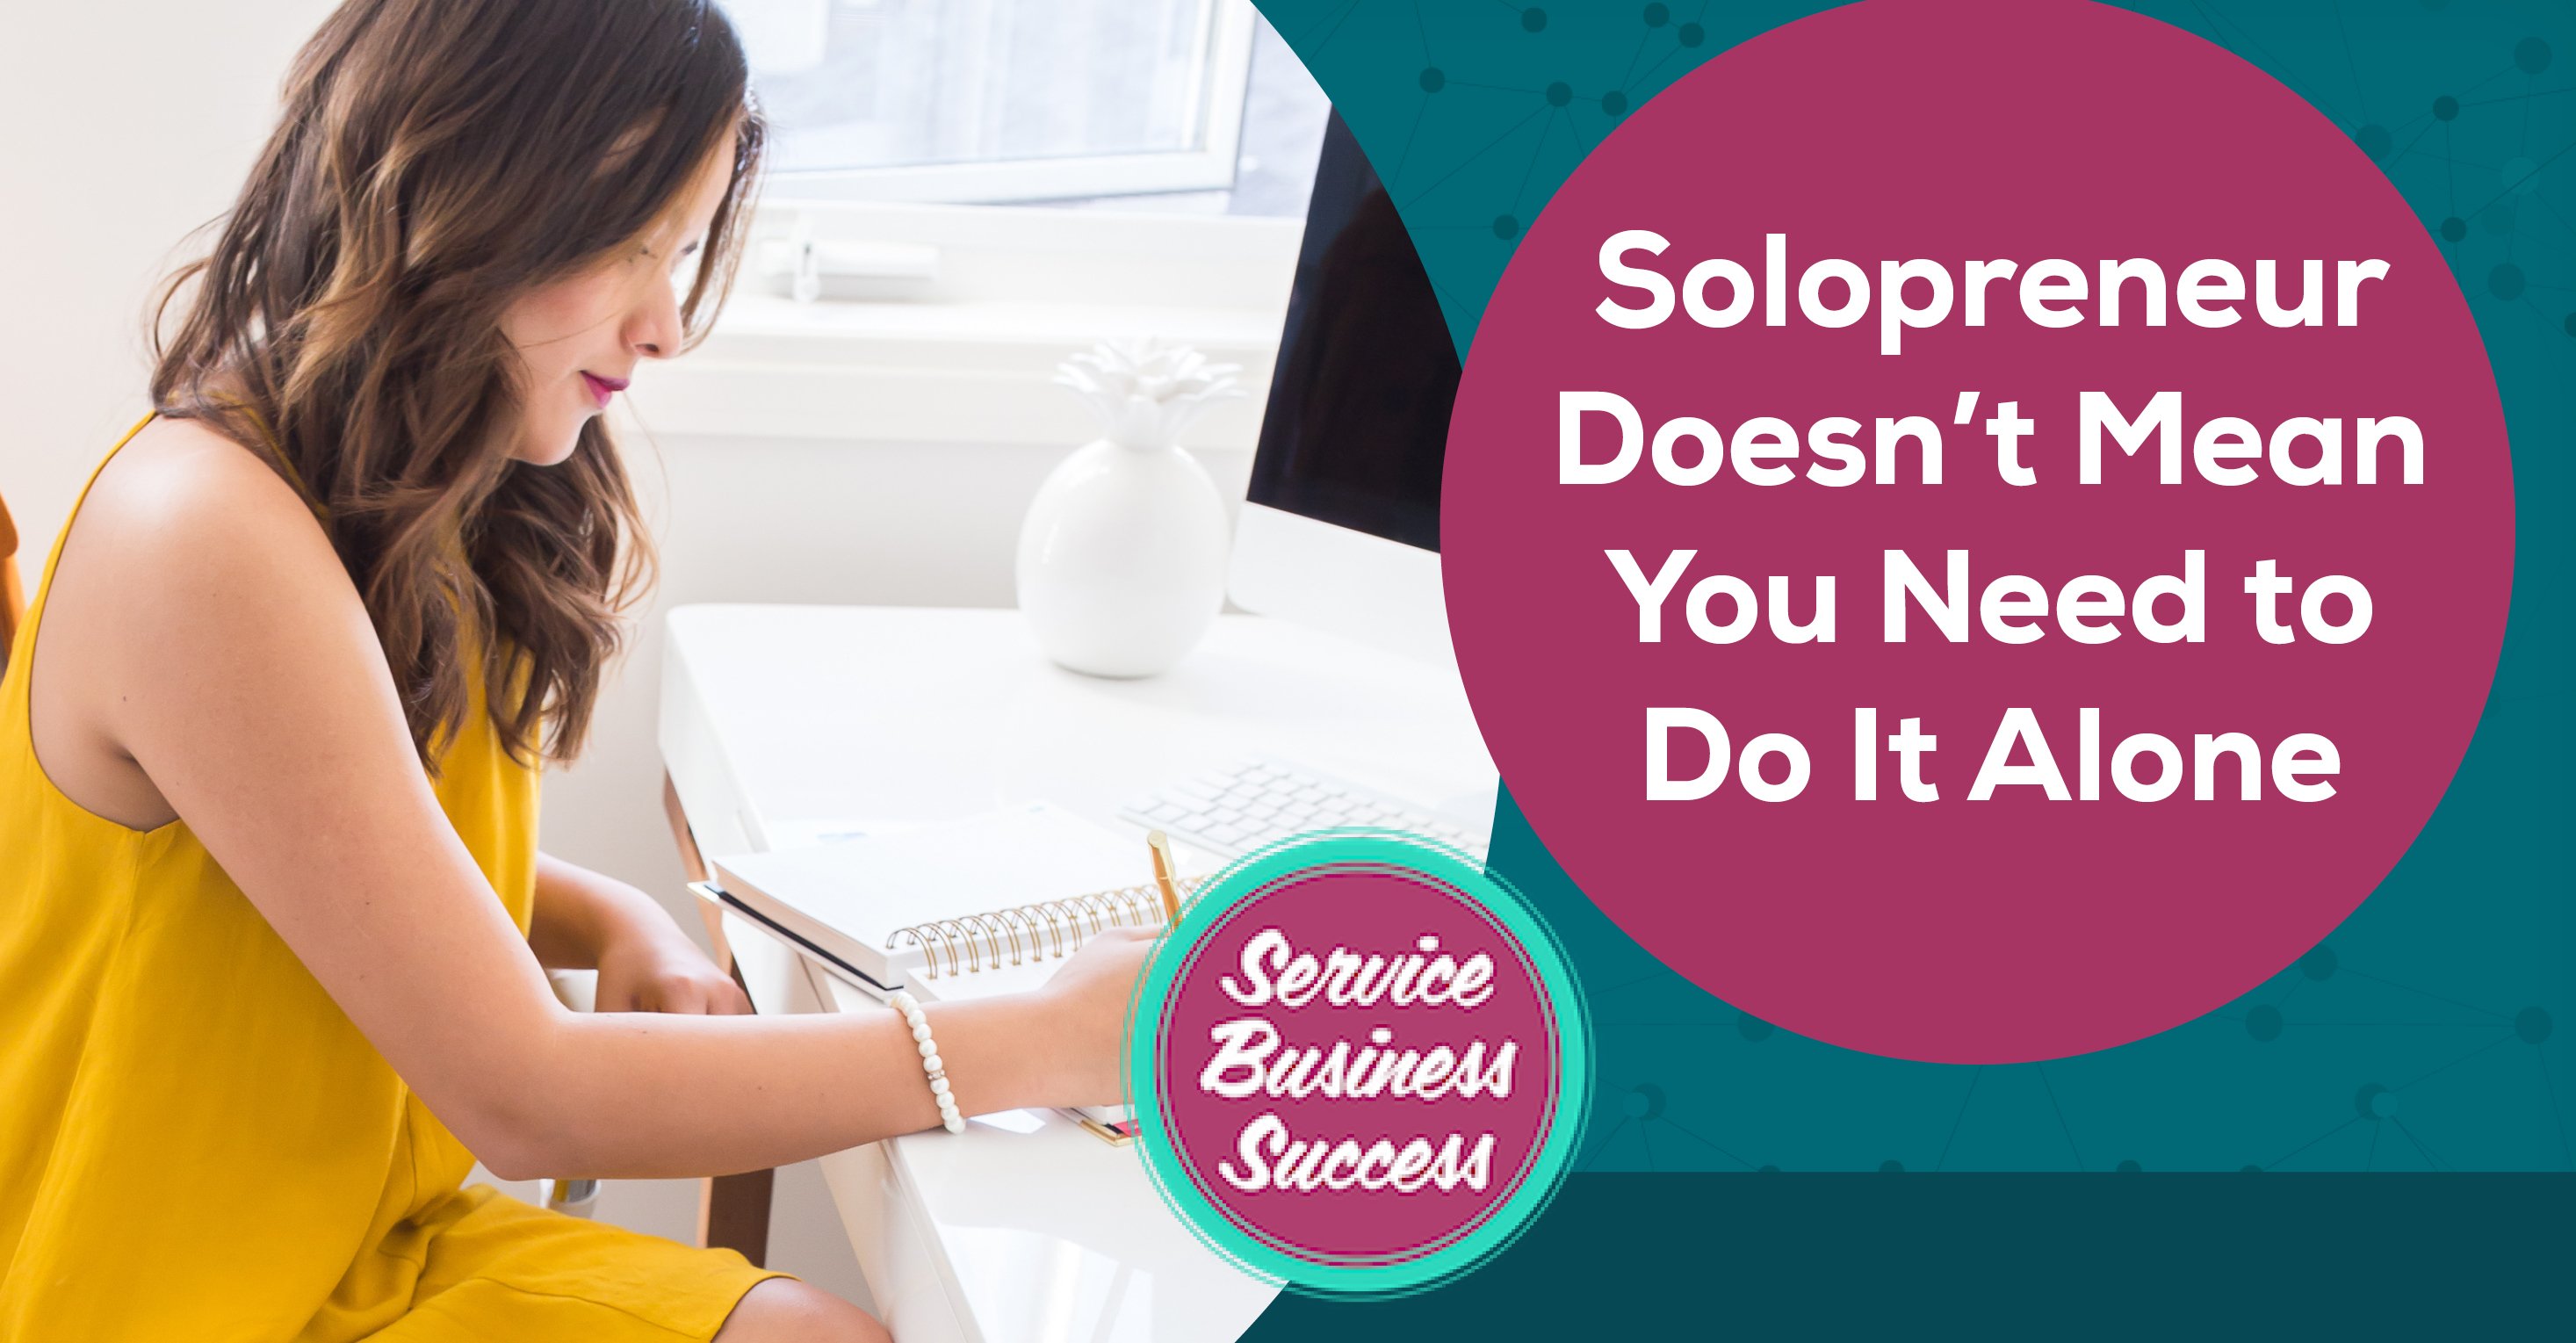 Sometimes life as a solopreneur can feel pretty overwhelming. Having to make all the decisions AND do all the work can sometimes feel like a real grind. In this episode we’re talking about how to avoid falling into the trap of trying to do ALL things by yourself and knowing when to get help.